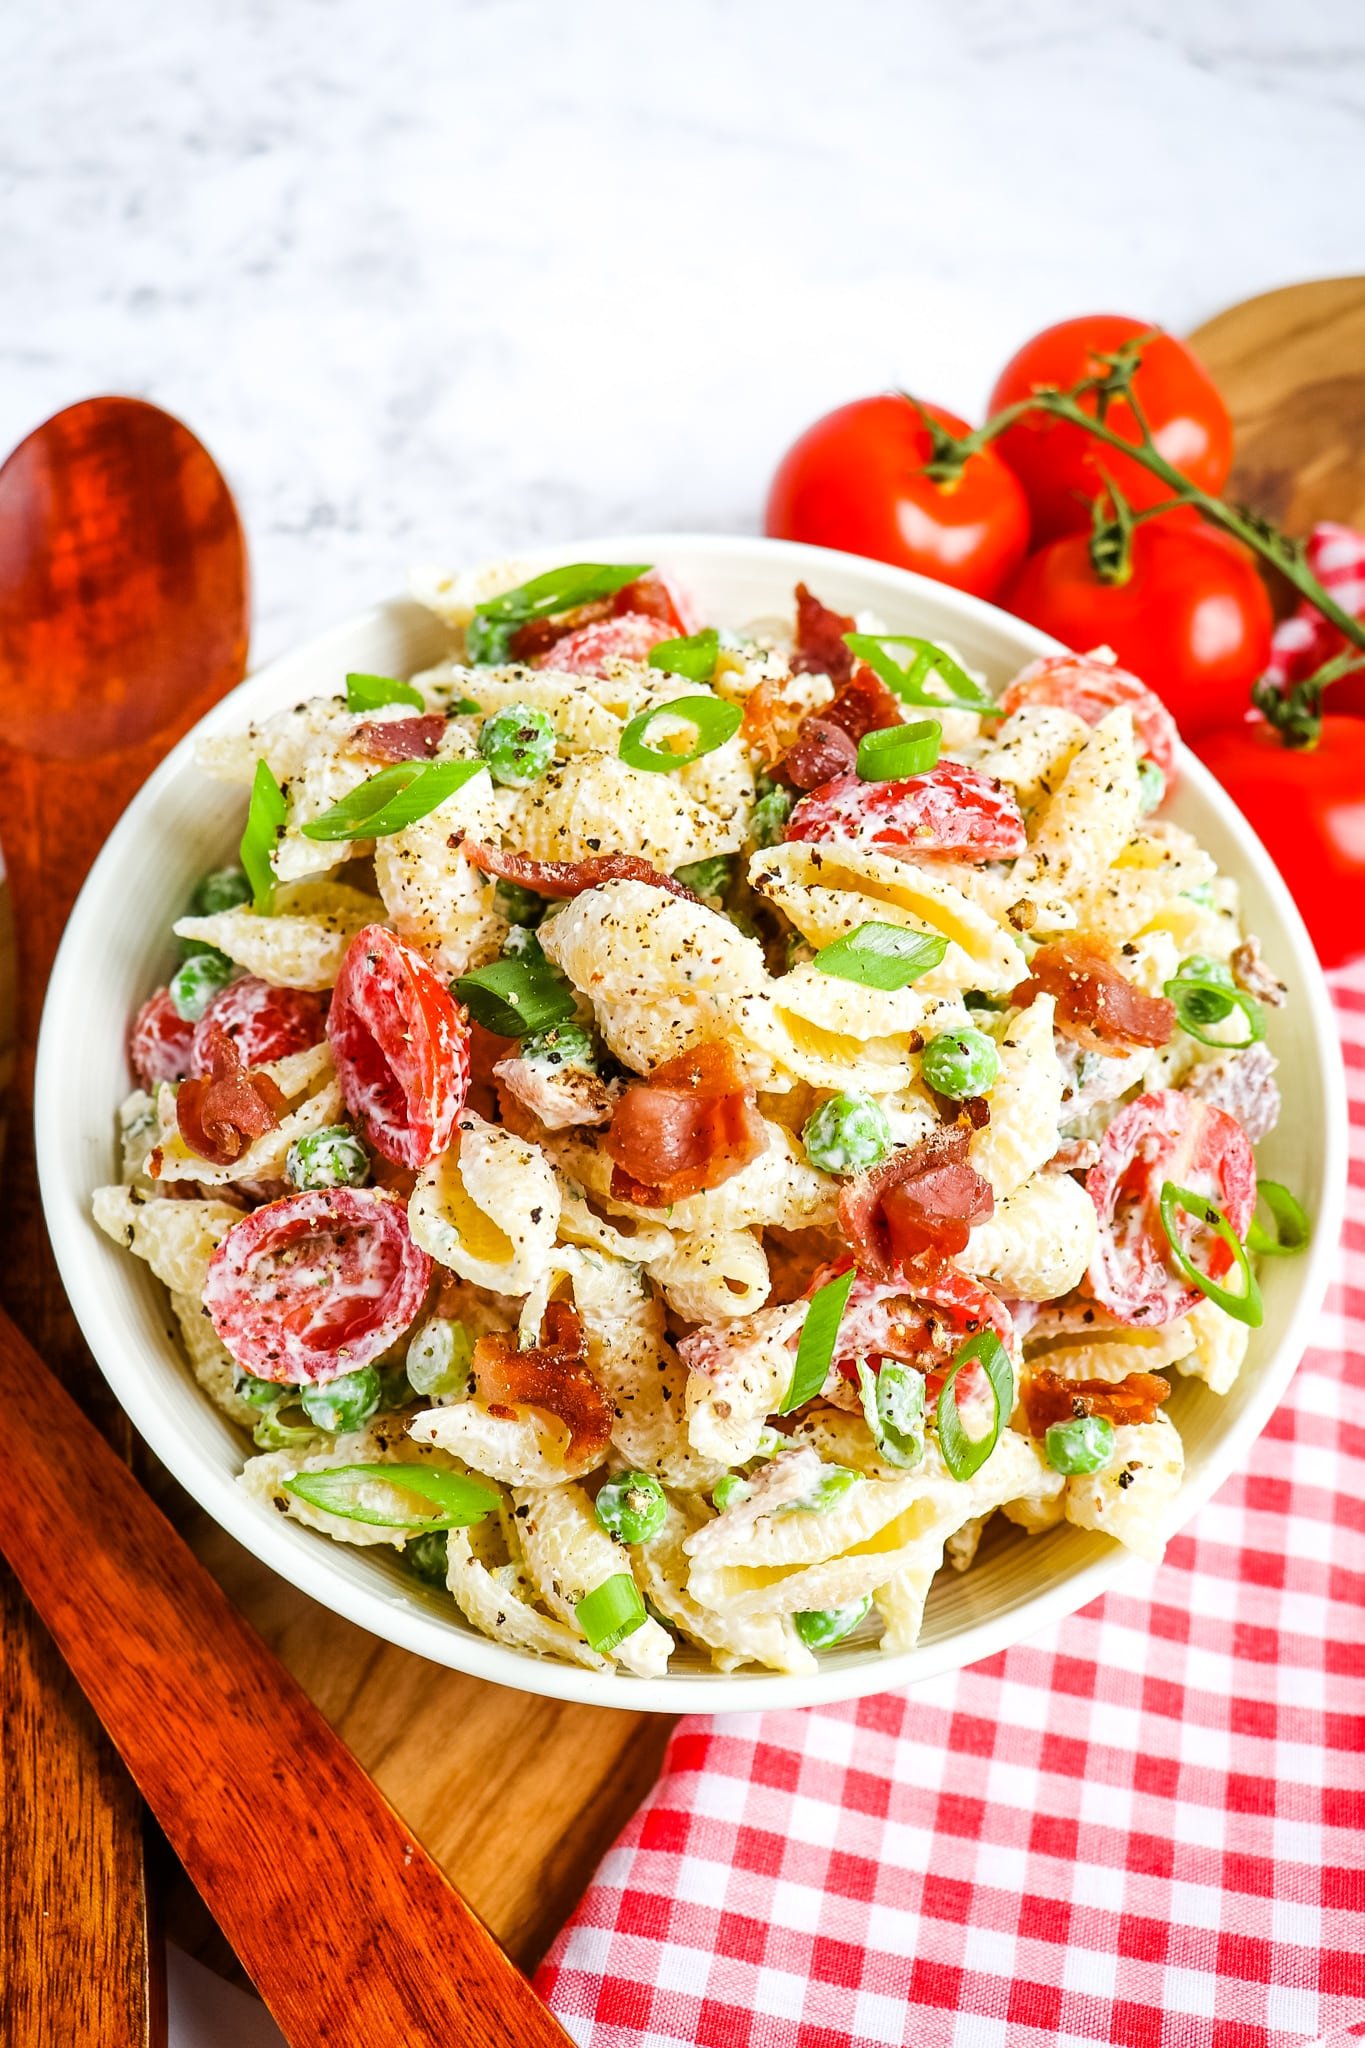 Bacon ranch pasta salad in white bowl, with tomatoes on the side.